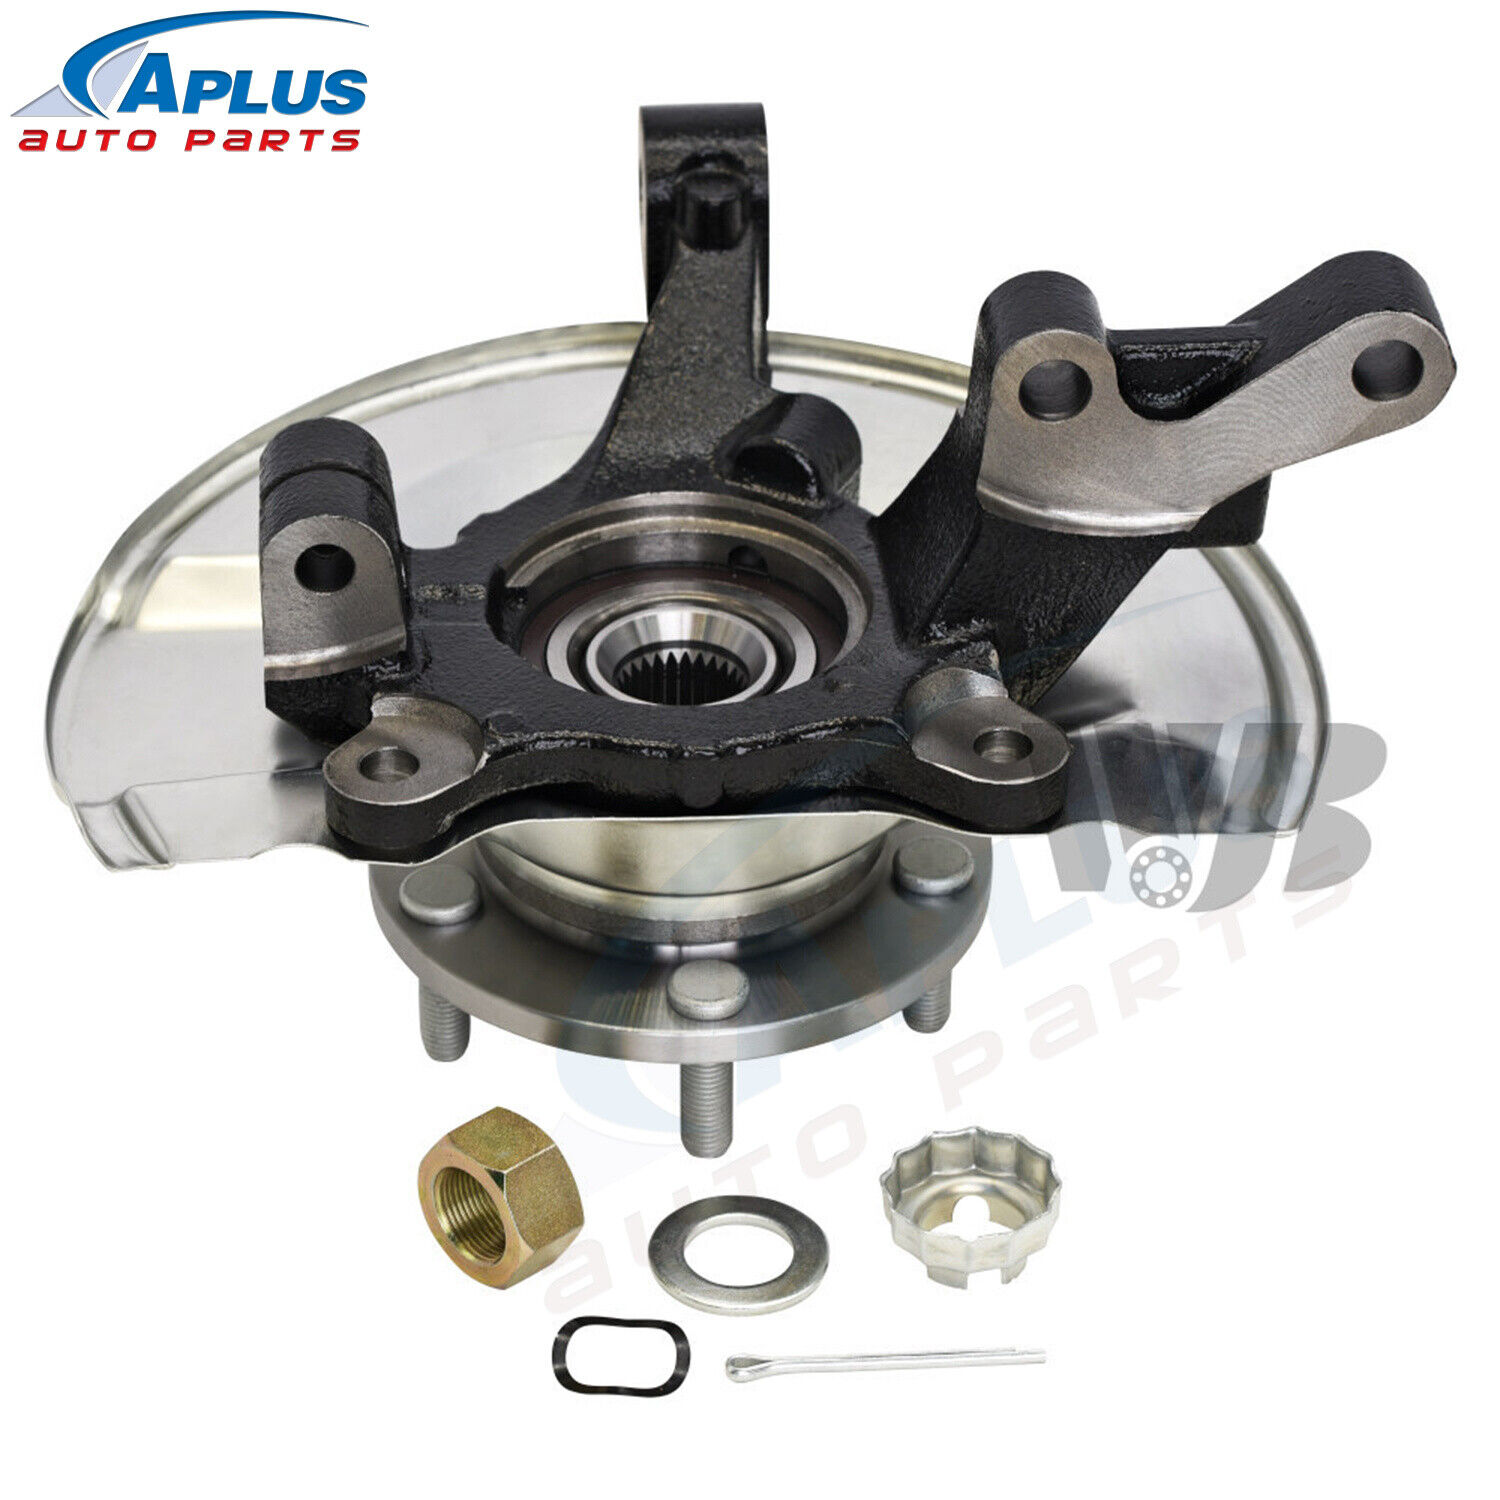 Front LH Knuckle & Wheel Bearing Hub For 07-12 Dodge Caliber w/ Rear Disc Brakes